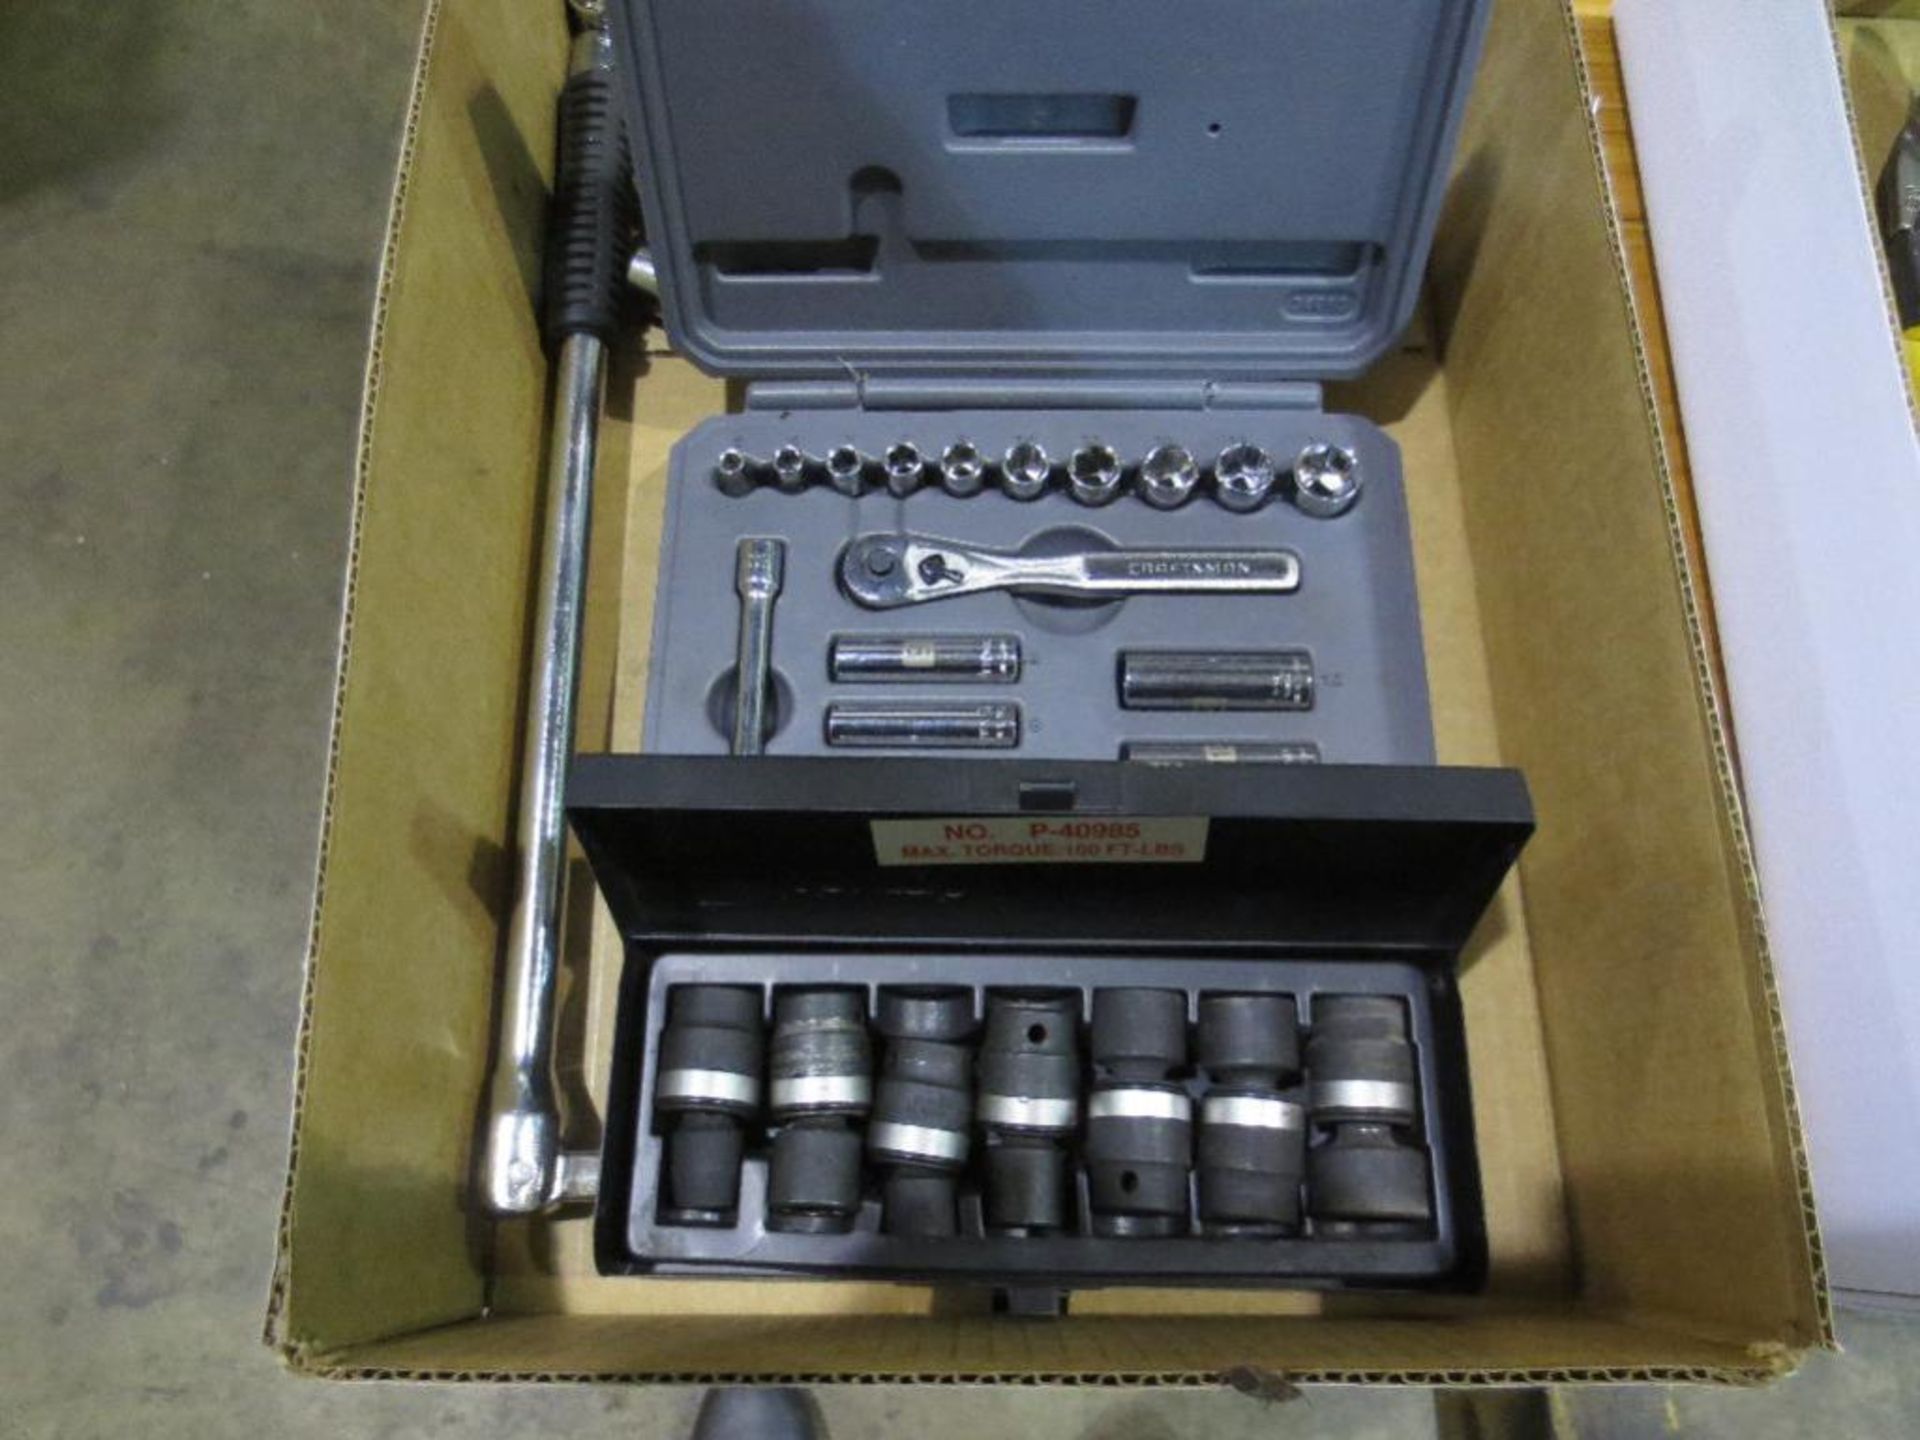 Assorted sockets and two socket sets-Craftsman and Pittsburg torque - Image 2 of 2